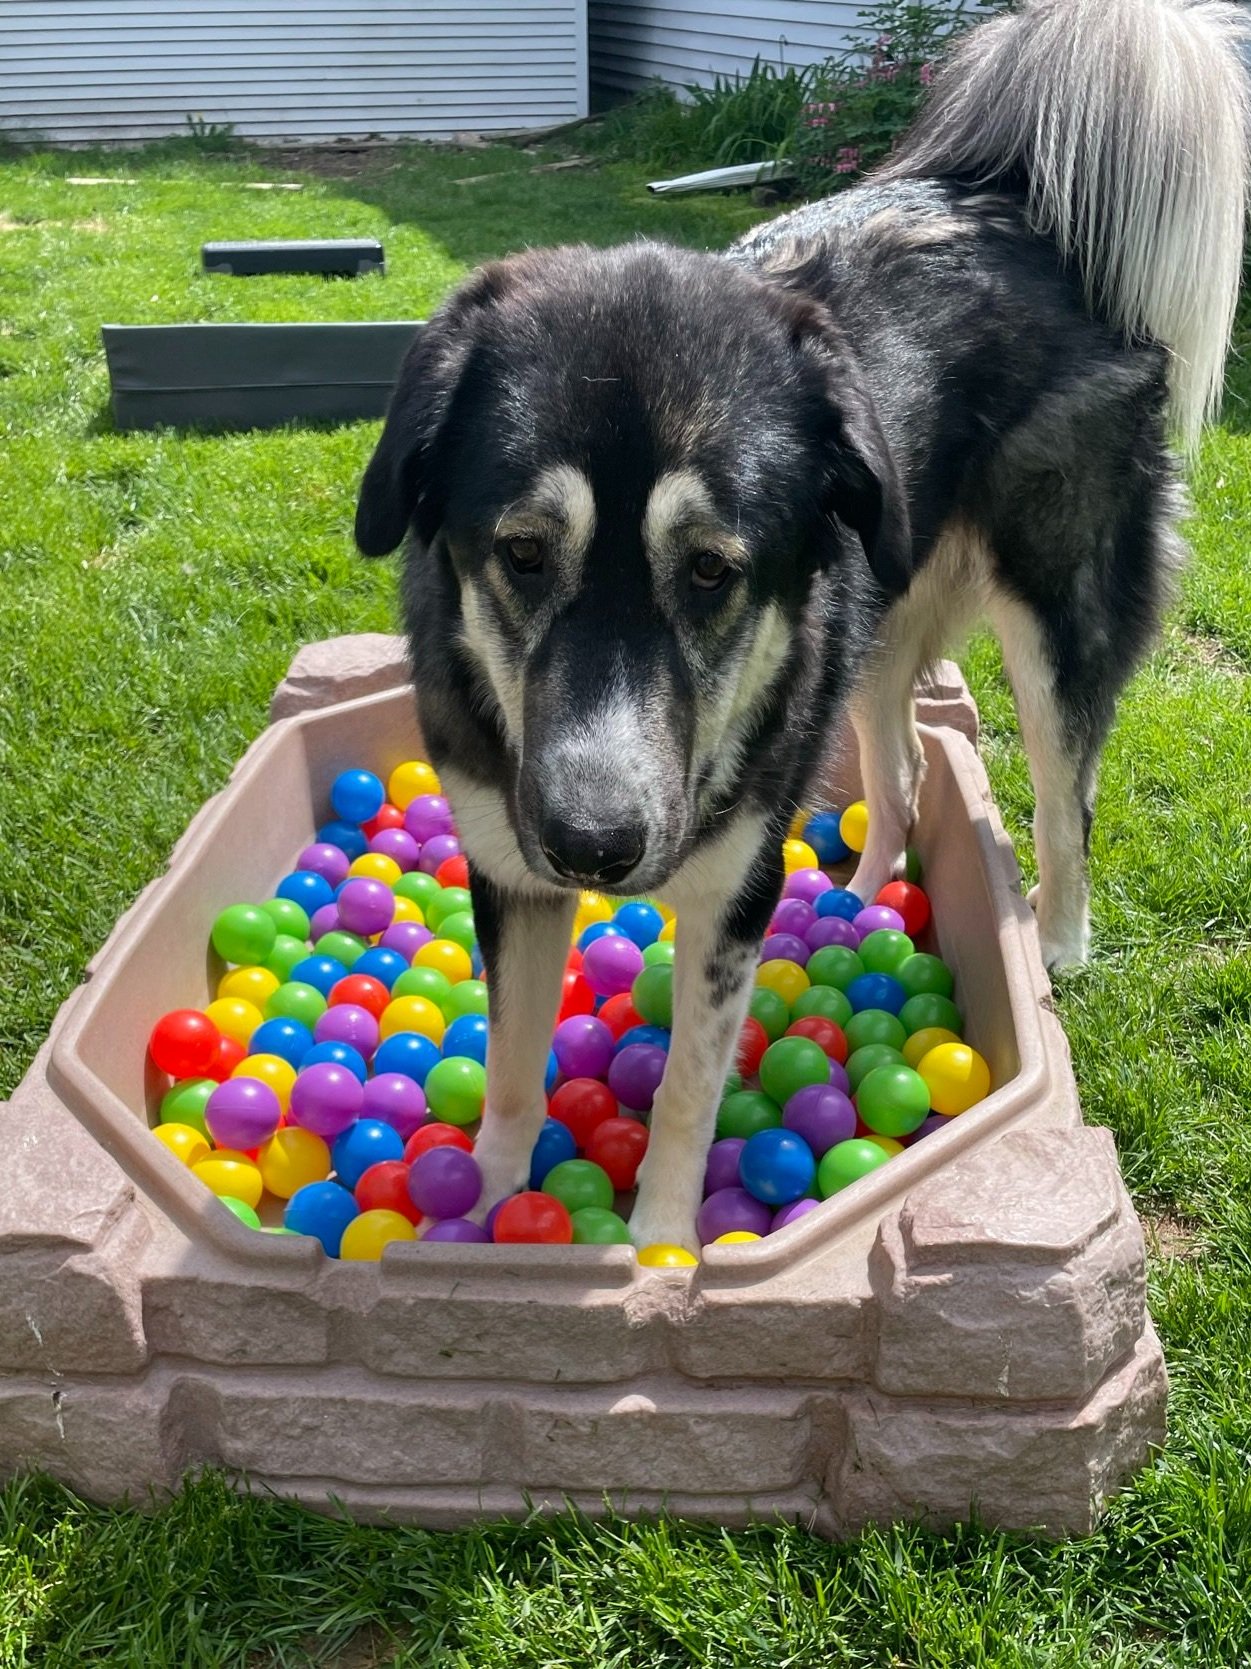 Canine Enrichment - have we got it all wrong? — Dogwood Adventure Play